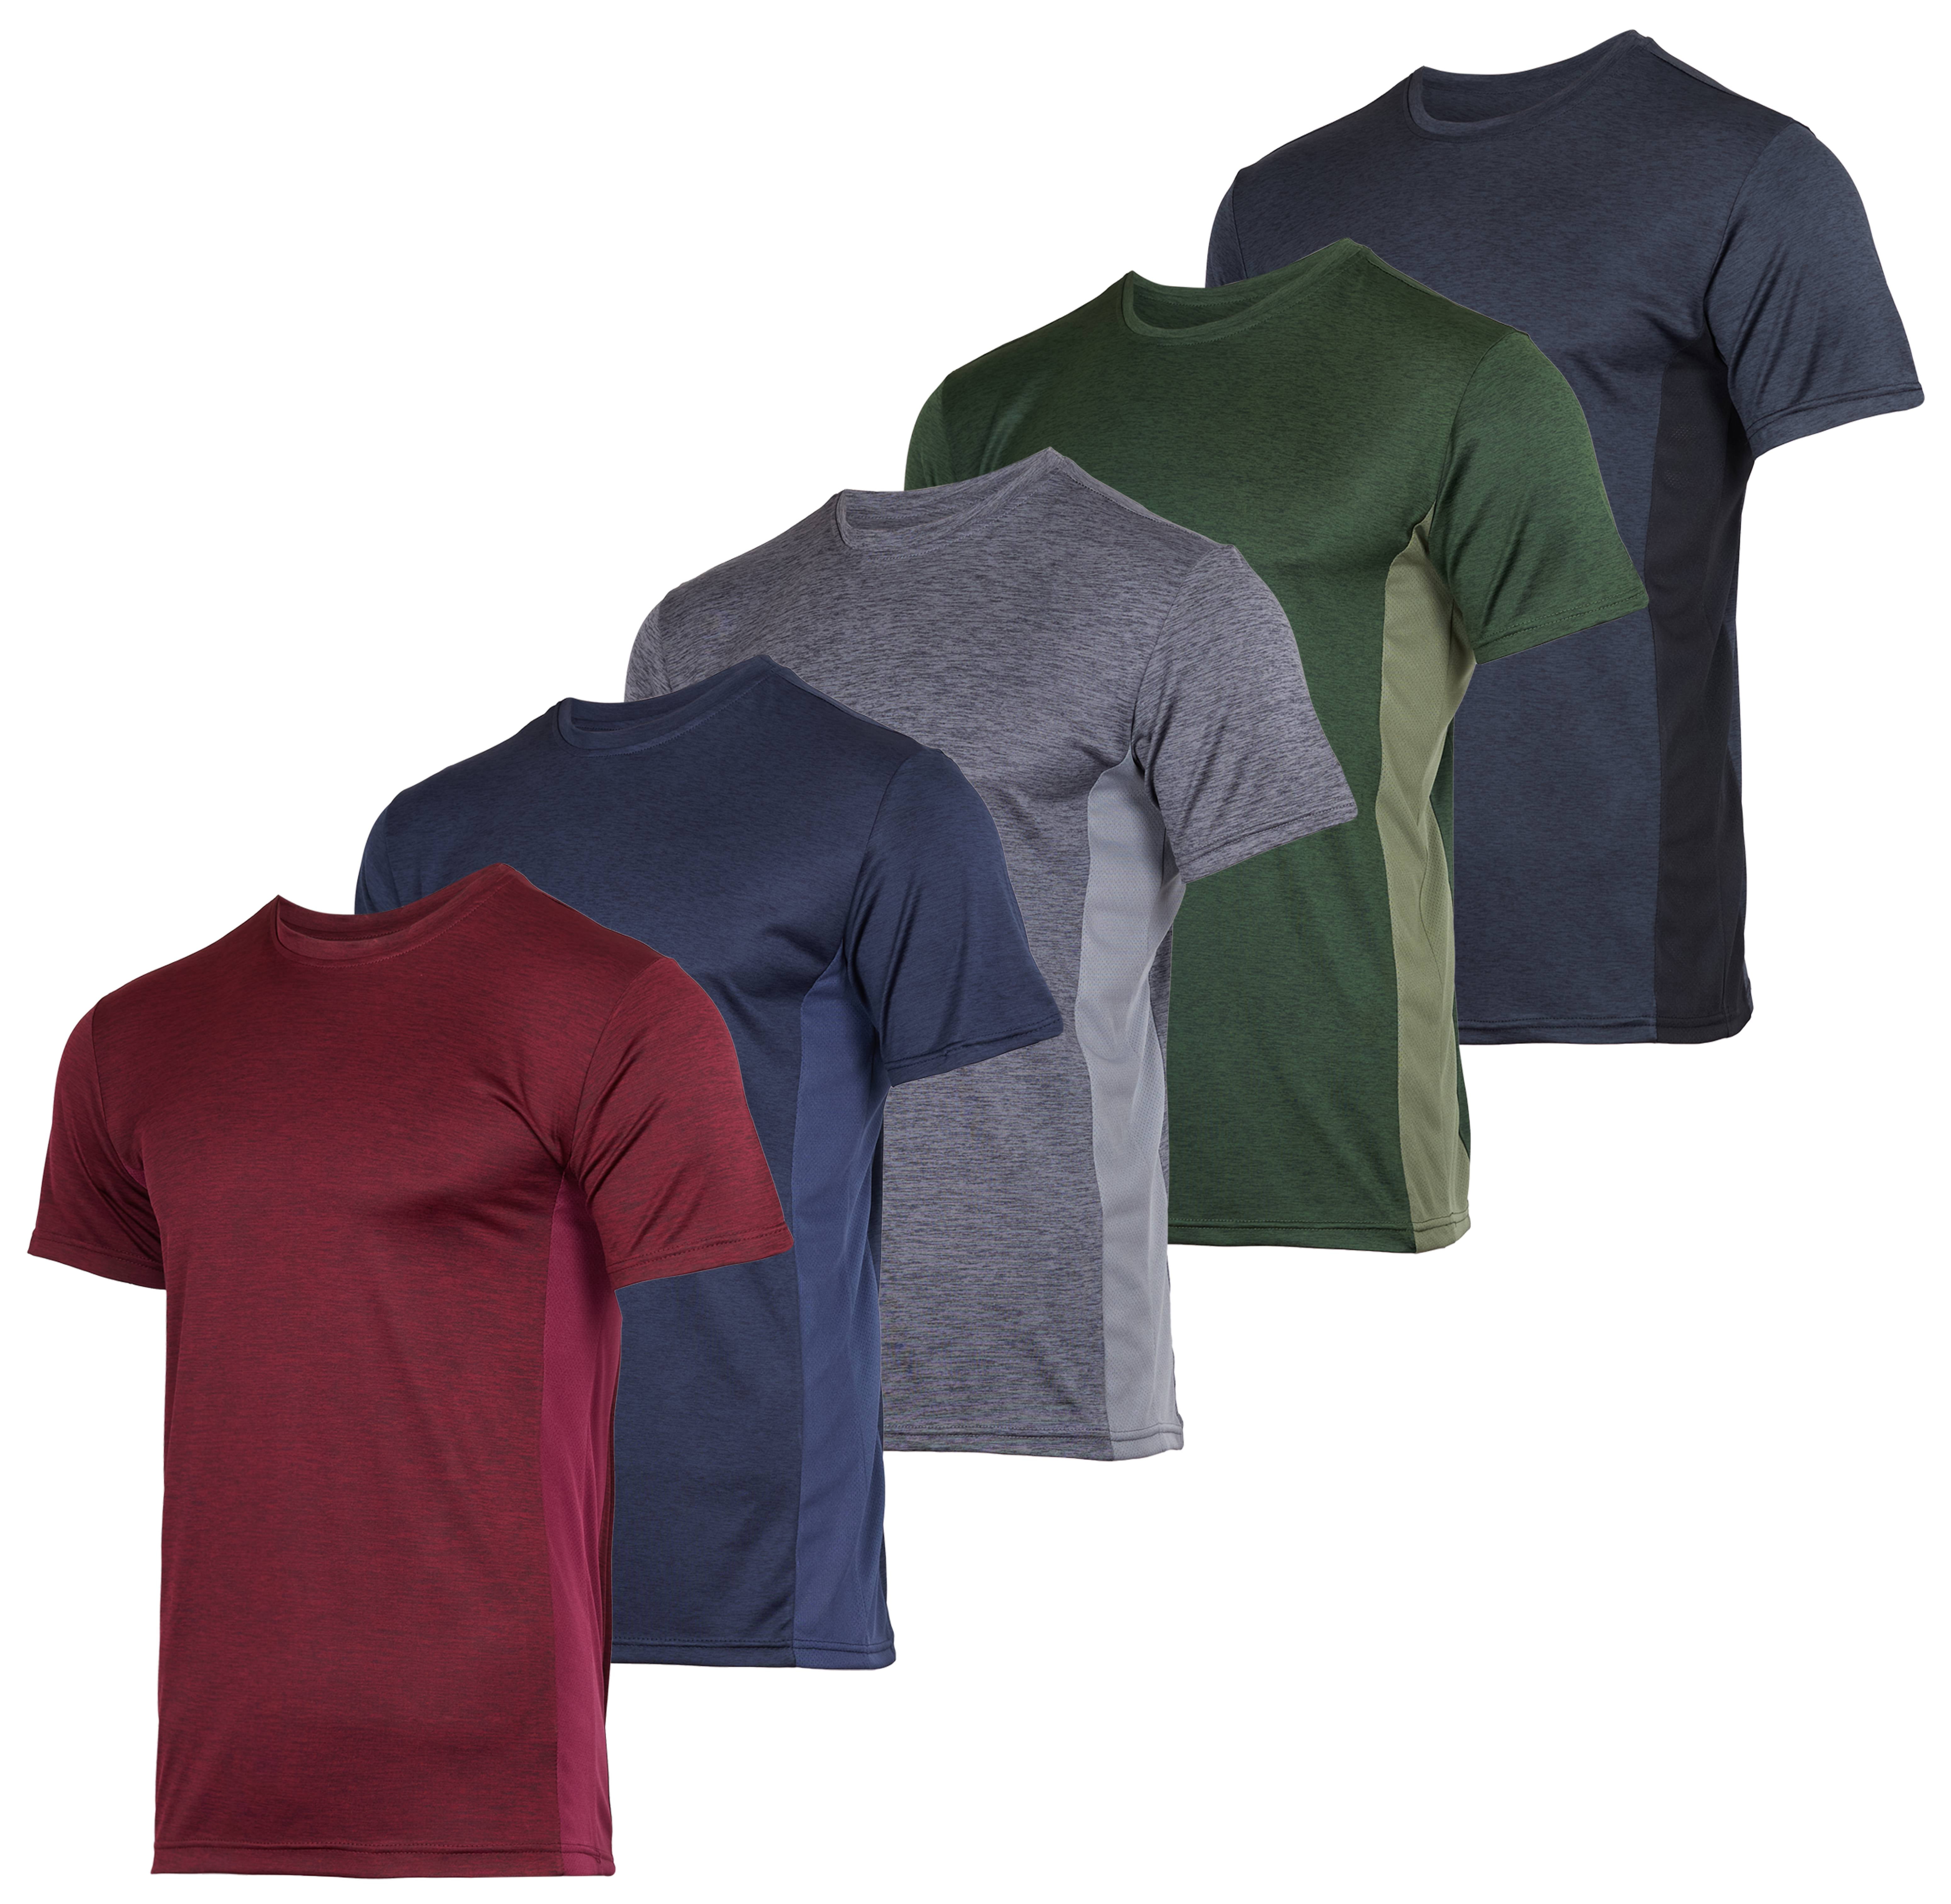 Active wear Dri-Fit T-shirts Moisture-wicking clothing Performance